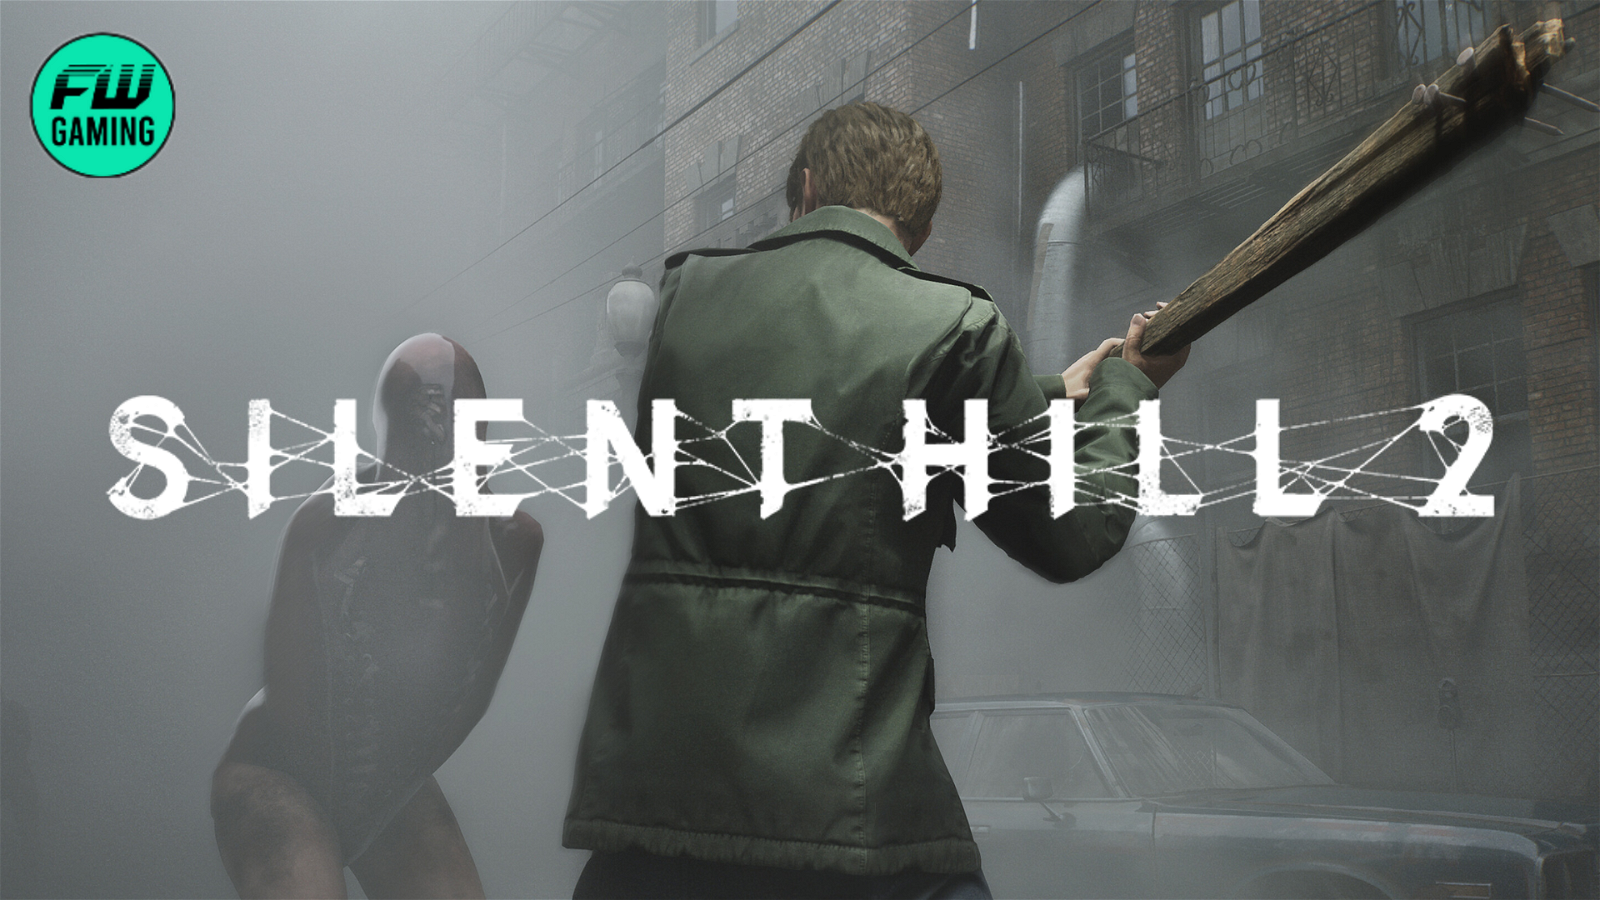 “It looked janky as hell”: Horror Fans Fume as the Silent Hill 2 Remake Looks Set to Disappoint After Latest State of Play Trailer